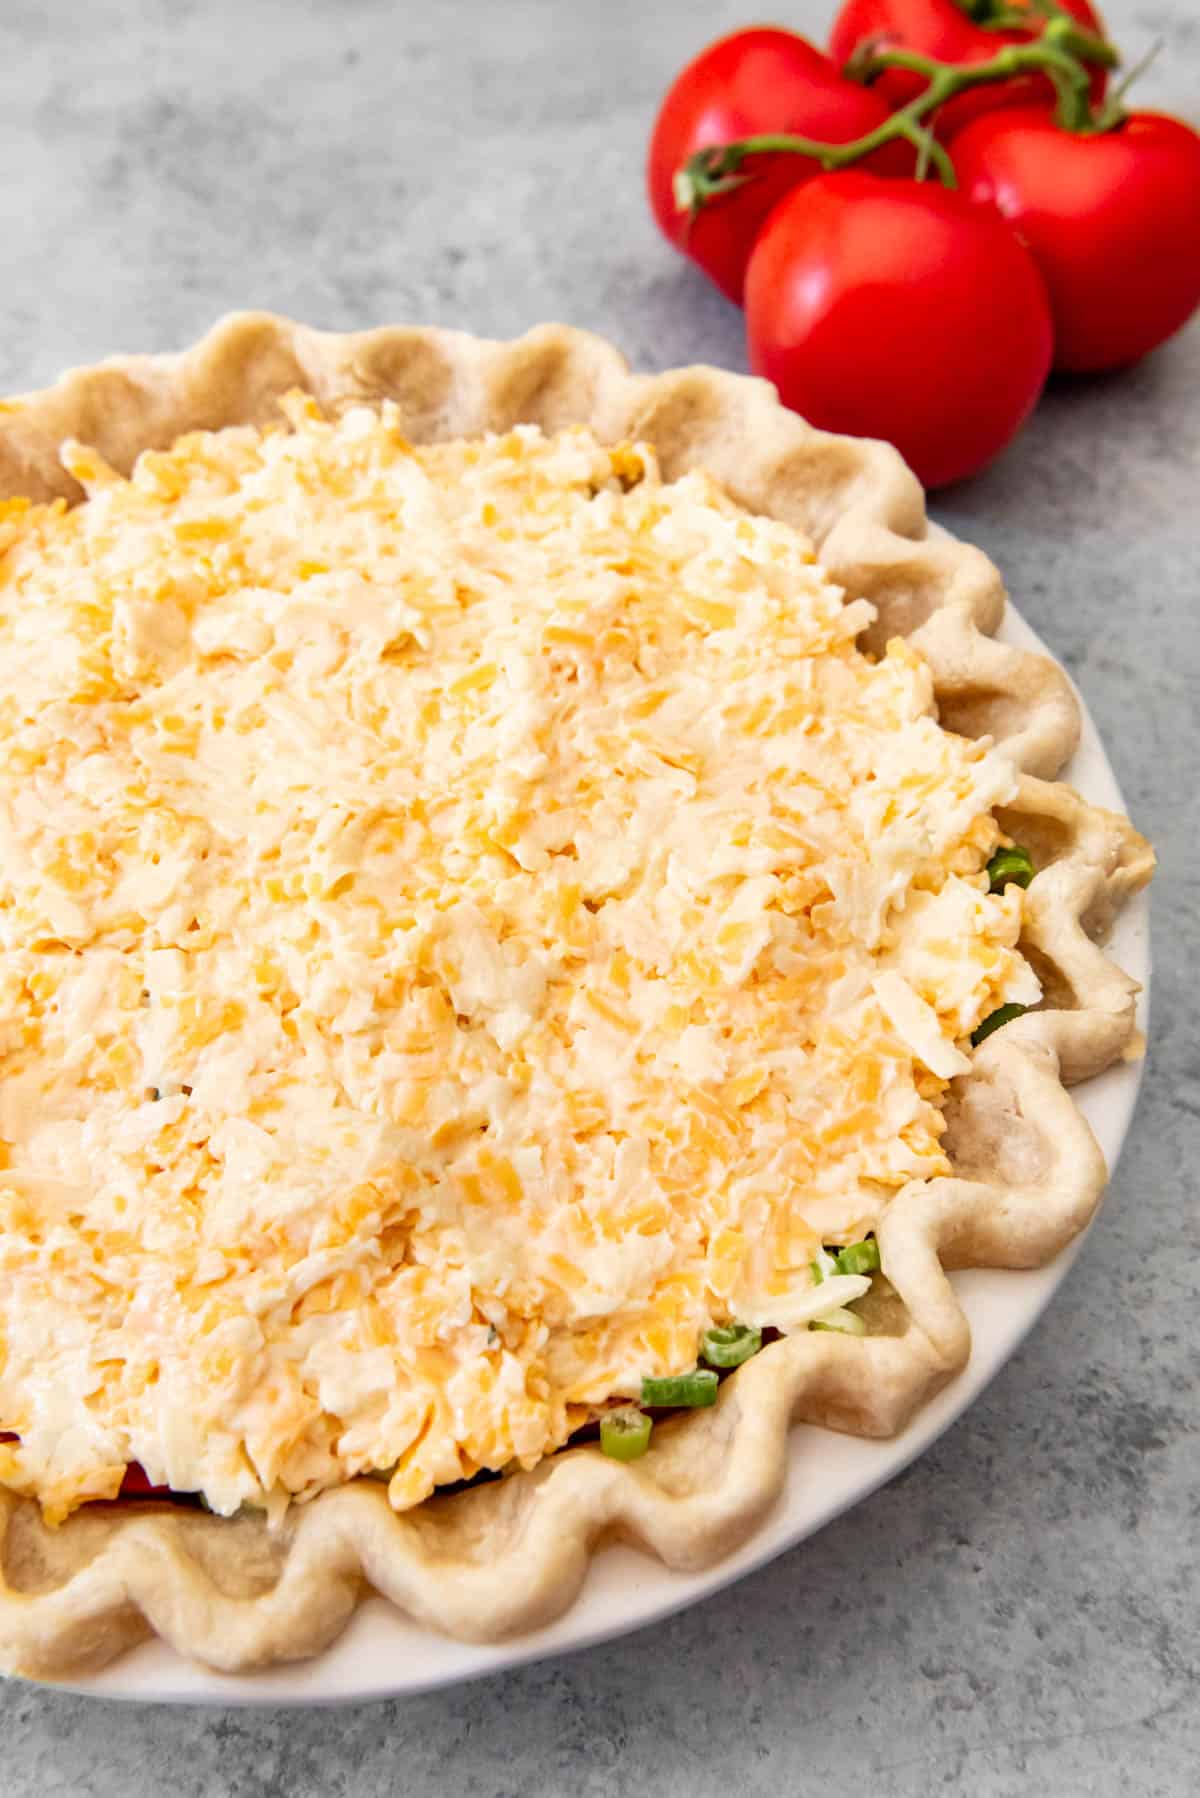 A layer of mayonnaise and shredded cheese on top of a tomato pie before baking.